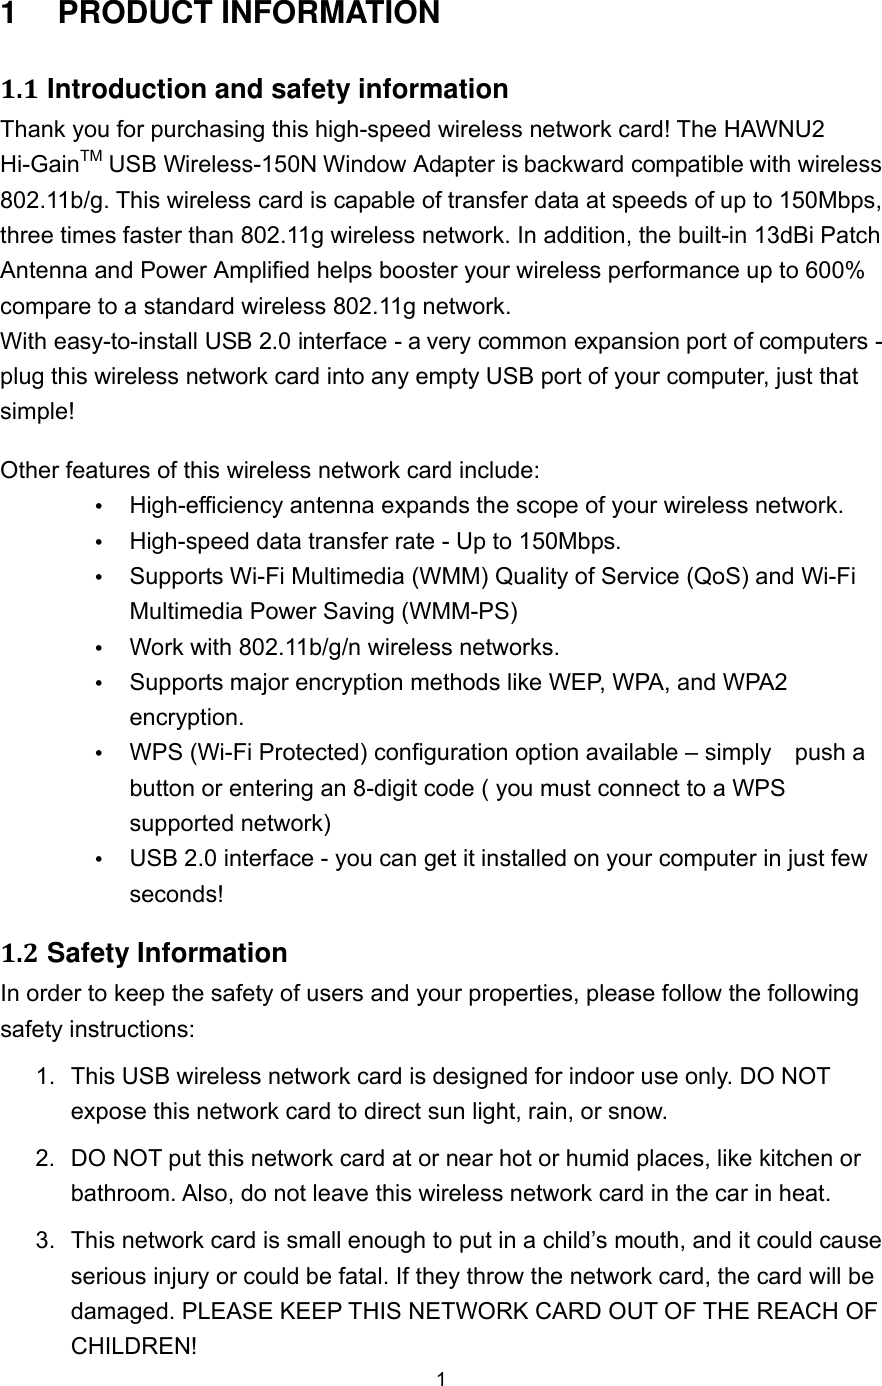  1 1  PRODUCT INFORMATION 1.1 Introduction and safety information Thank you for purchasing this high-speed wireless network card! The HAWNU2 Hi-GainTM USB Wireless-150N Window Adapter is backward compatible with wireless 802.11b/g. This wireless card is capable of transfer data at speeds of up to 150Mbps, three times faster than 802.11g wireless network. In addition, the built-in 13dBi Patch Antenna and Power Amplified helps booster your wireless performance up to 600% compare to a standard wireless 802.11g network.   With easy-to-install USB 2.0 interface - a very common expansion port of computers - plug this wireless network card into any empty USB port of your computer, just that simple! Other features of this wireless network card include:  High-efficiency antenna expands the scope of your wireless network.  High-speed data transfer rate - Up to 150Mbps.  Supports Wi-Fi Multimedia (WMM) Quality of Service (QoS) and Wi-Fi Multimedia Power Saving (WMM-PS)  Work with 802.11b/g/n wireless networks.  Supports major encryption methods like WEP, WPA, and WPA2 encryption.  WPS (Wi-Fi Protected) configuration option available – simply    push a button or entering an 8-digit code ( you must connect to a WPS supported network)  USB 2.0 interface - you can get it installed on your computer in just few seconds! 1.2 Safety Information In order to keep the safety of users and your properties, please follow the following safety instructions: 1.  This USB wireless network card is designed for indoor use only. DO NOT expose this network card to direct sun light, rain, or snow. 2.  DO NOT put this network card at or near hot or humid places, like kitchen or bathroom. Also, do not leave this wireless network card in the car in heat. 3.  This network card is small enough to put in a child’s mouth, and it could cause serious injury or could be fatal. If they throw the network card, the card will be damaged. PLEASE KEEP THIS NETWORK CARD OUT OF THE REACH OF CHILDREN! 